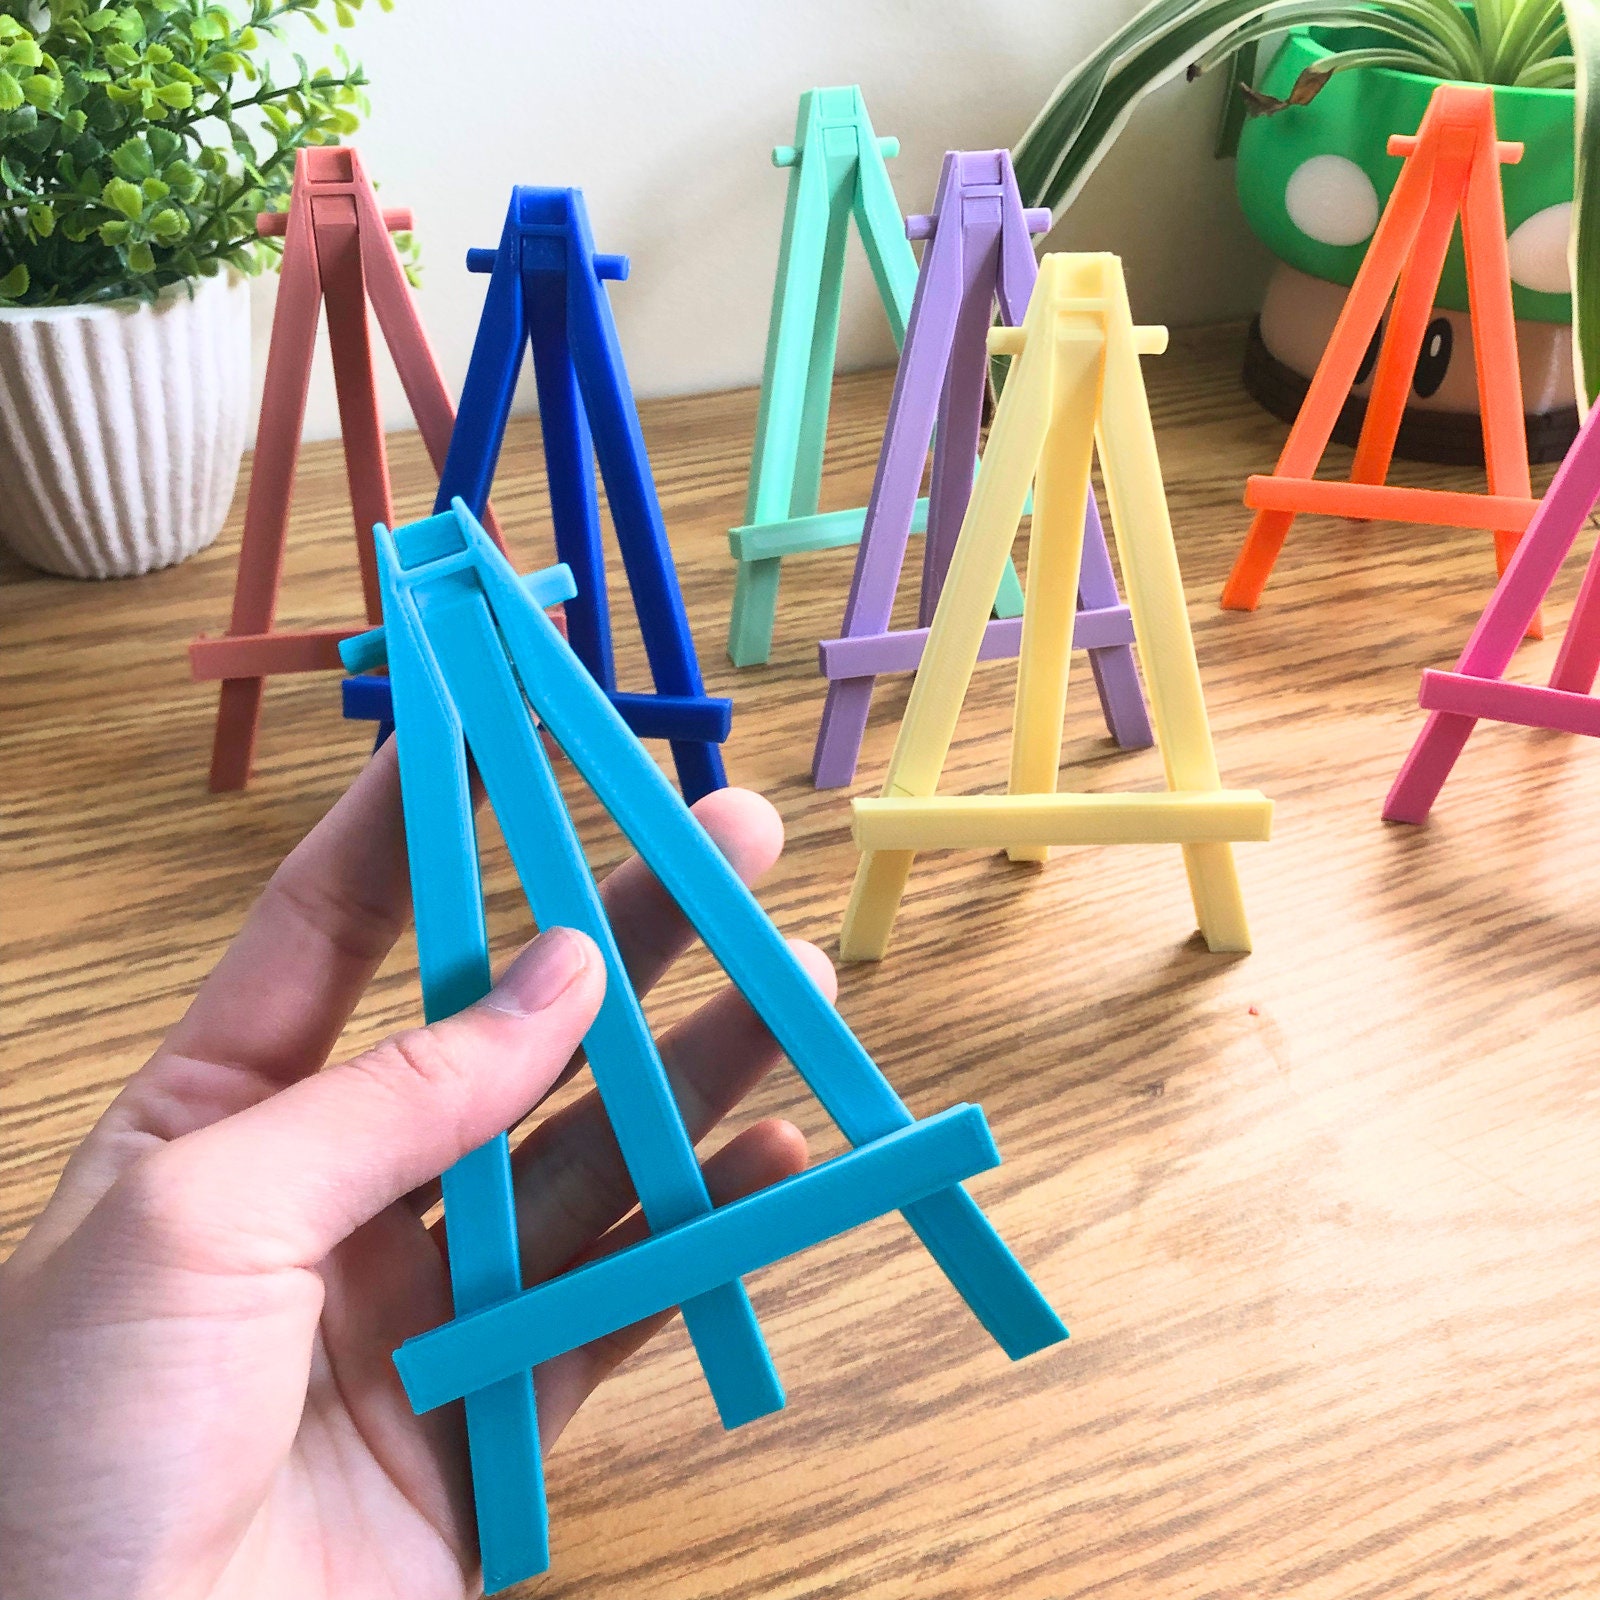 Mini Art Easel, Wooden Triangle Easels for Displaying Embroidery